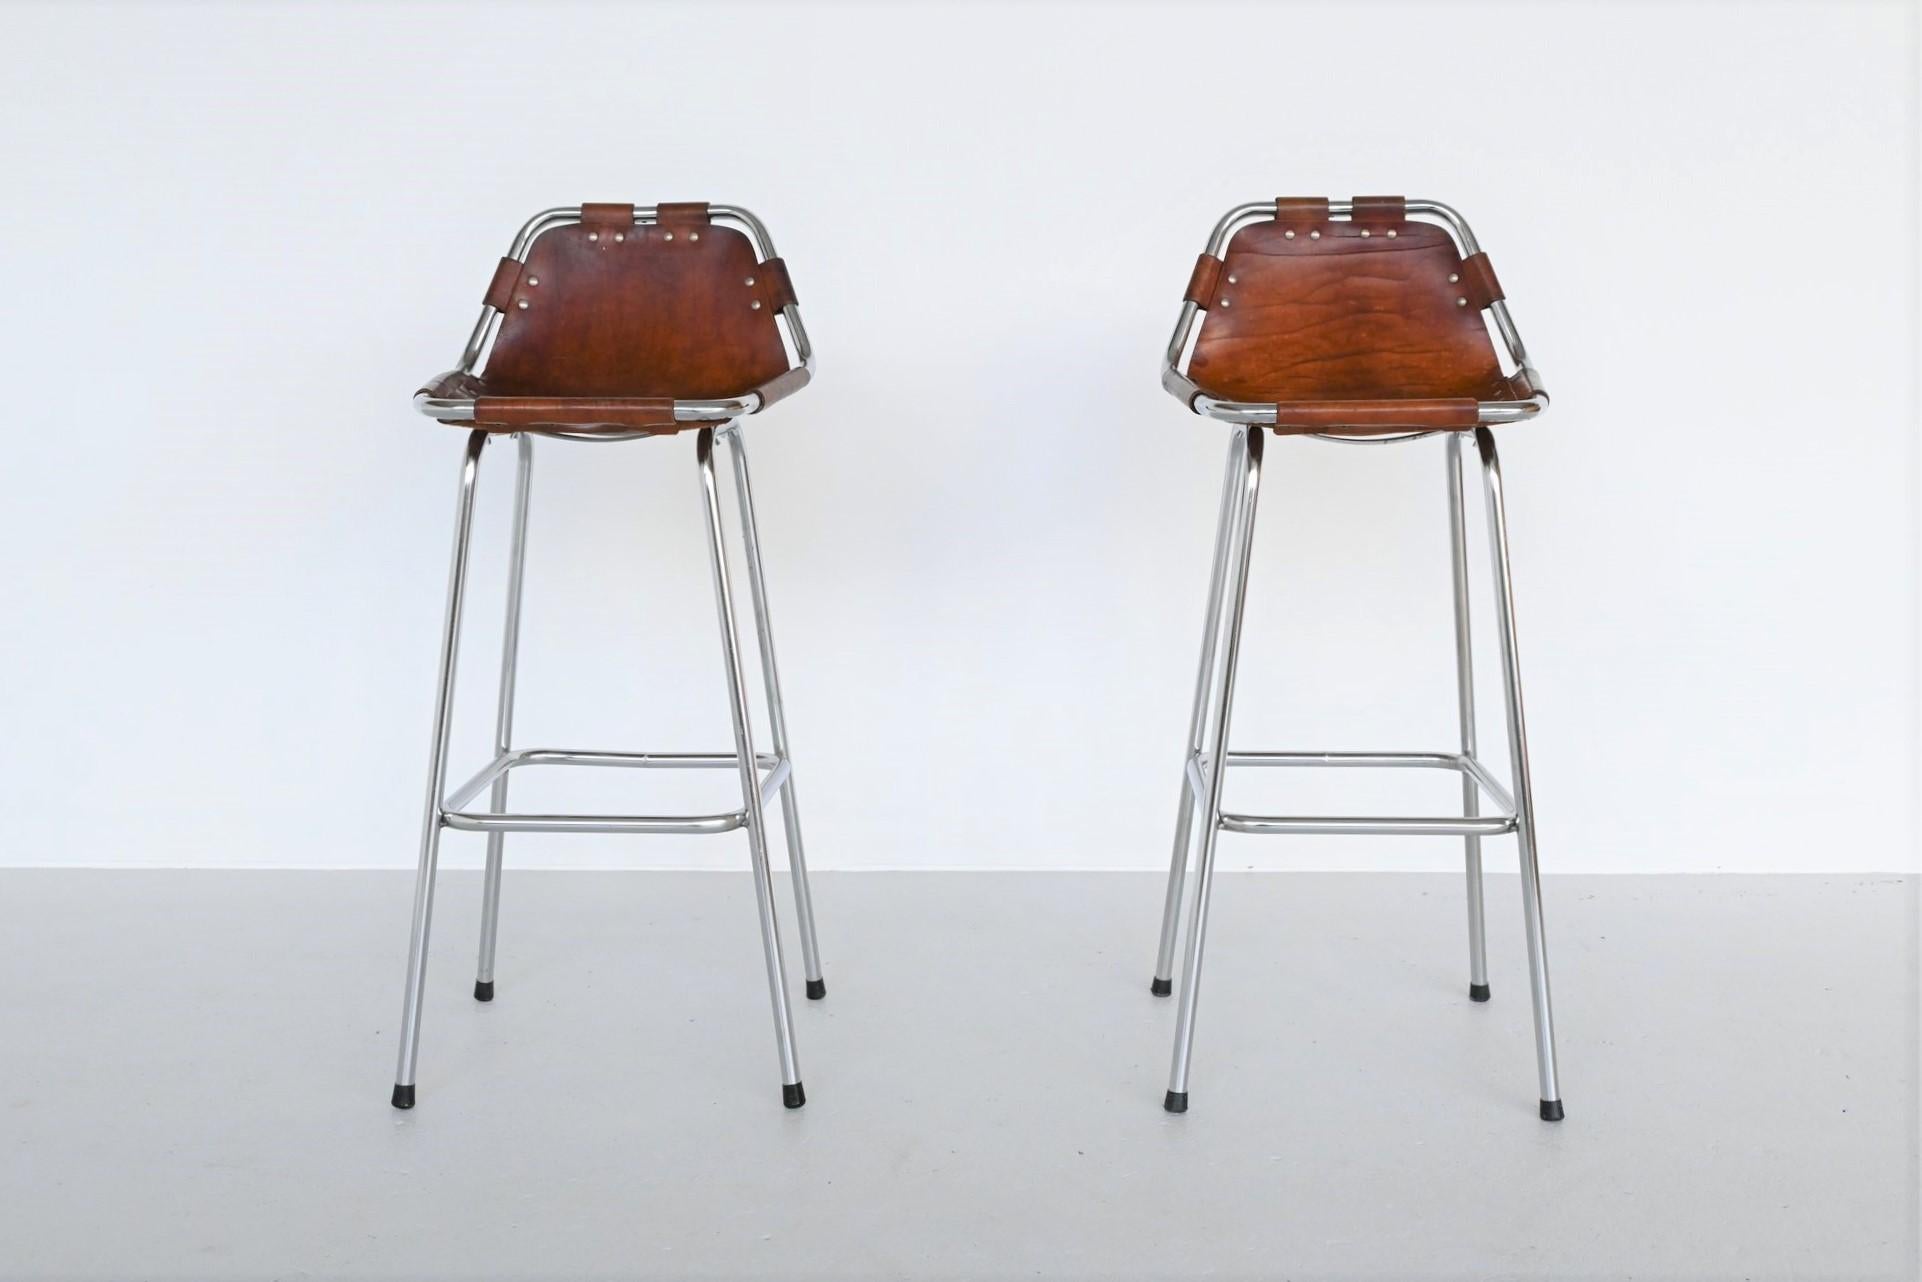 Set of 2 great shaped bar stools used by Charlotte Perriand for Les Arcs ski resort, France 1960. The stools have chrome plated tubular metal frames and thick natural leather seats with nice patina of usage. They are strong, comfortable and look